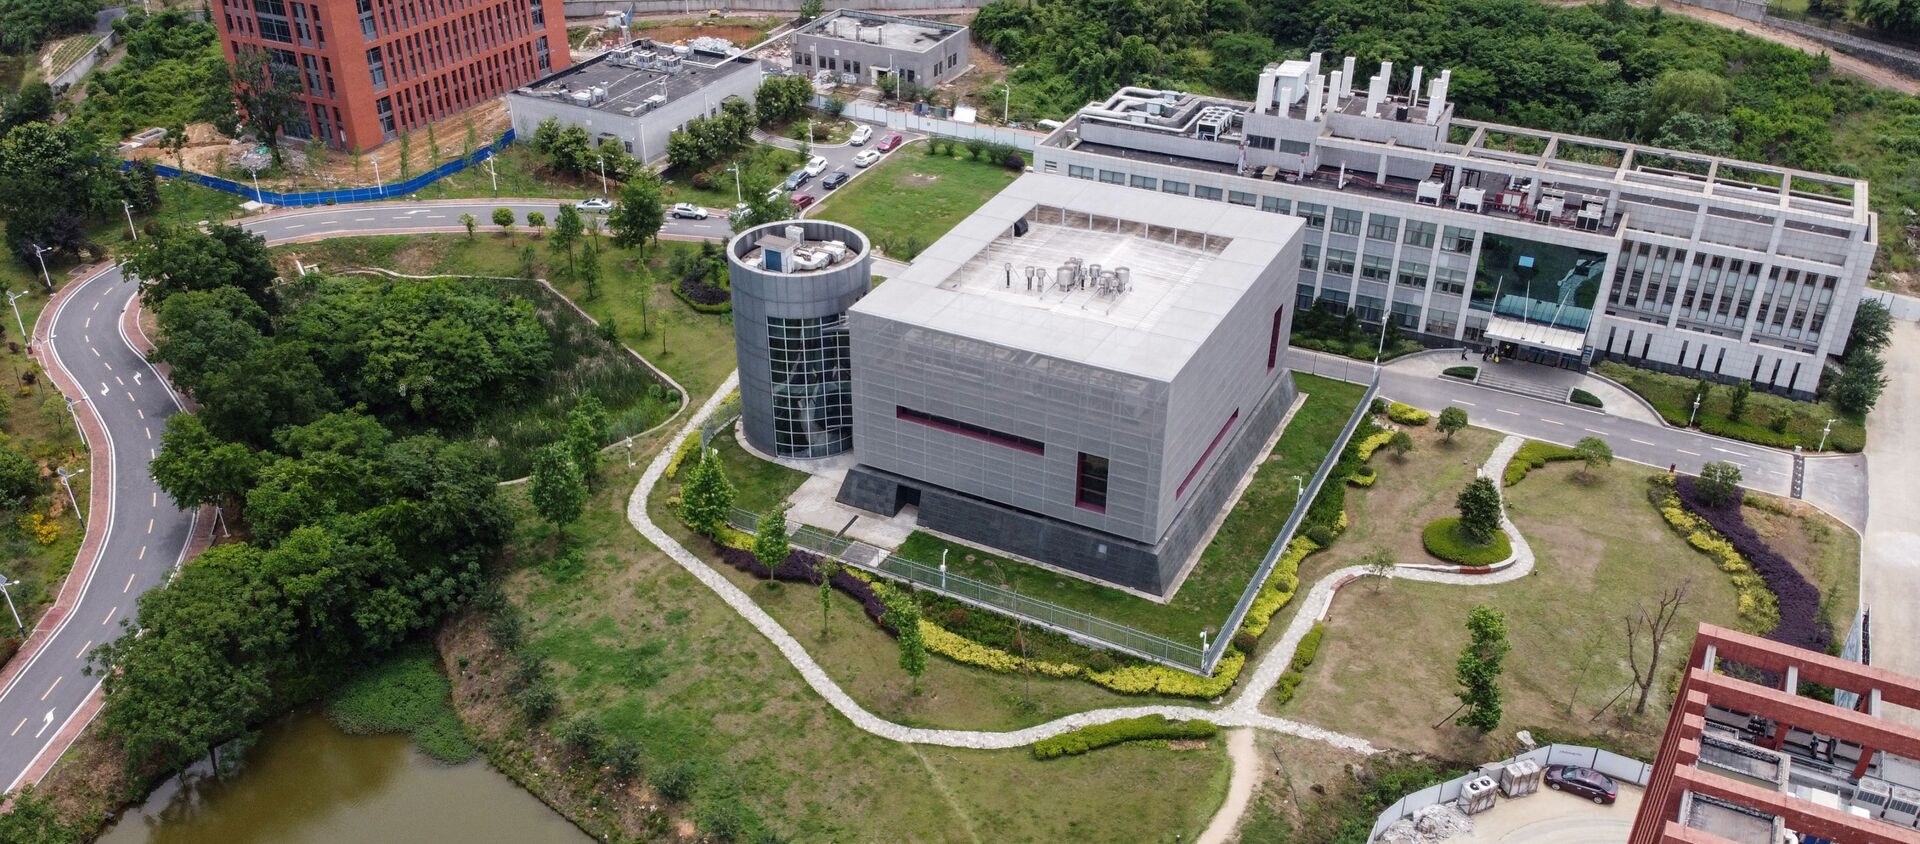 An aerial view of the P4 laboratory on the campus of the Wuhan Institute of Virology in China's central Hubei province on 13 May 2020. - Sputnik International, 1920, 13.01.2021